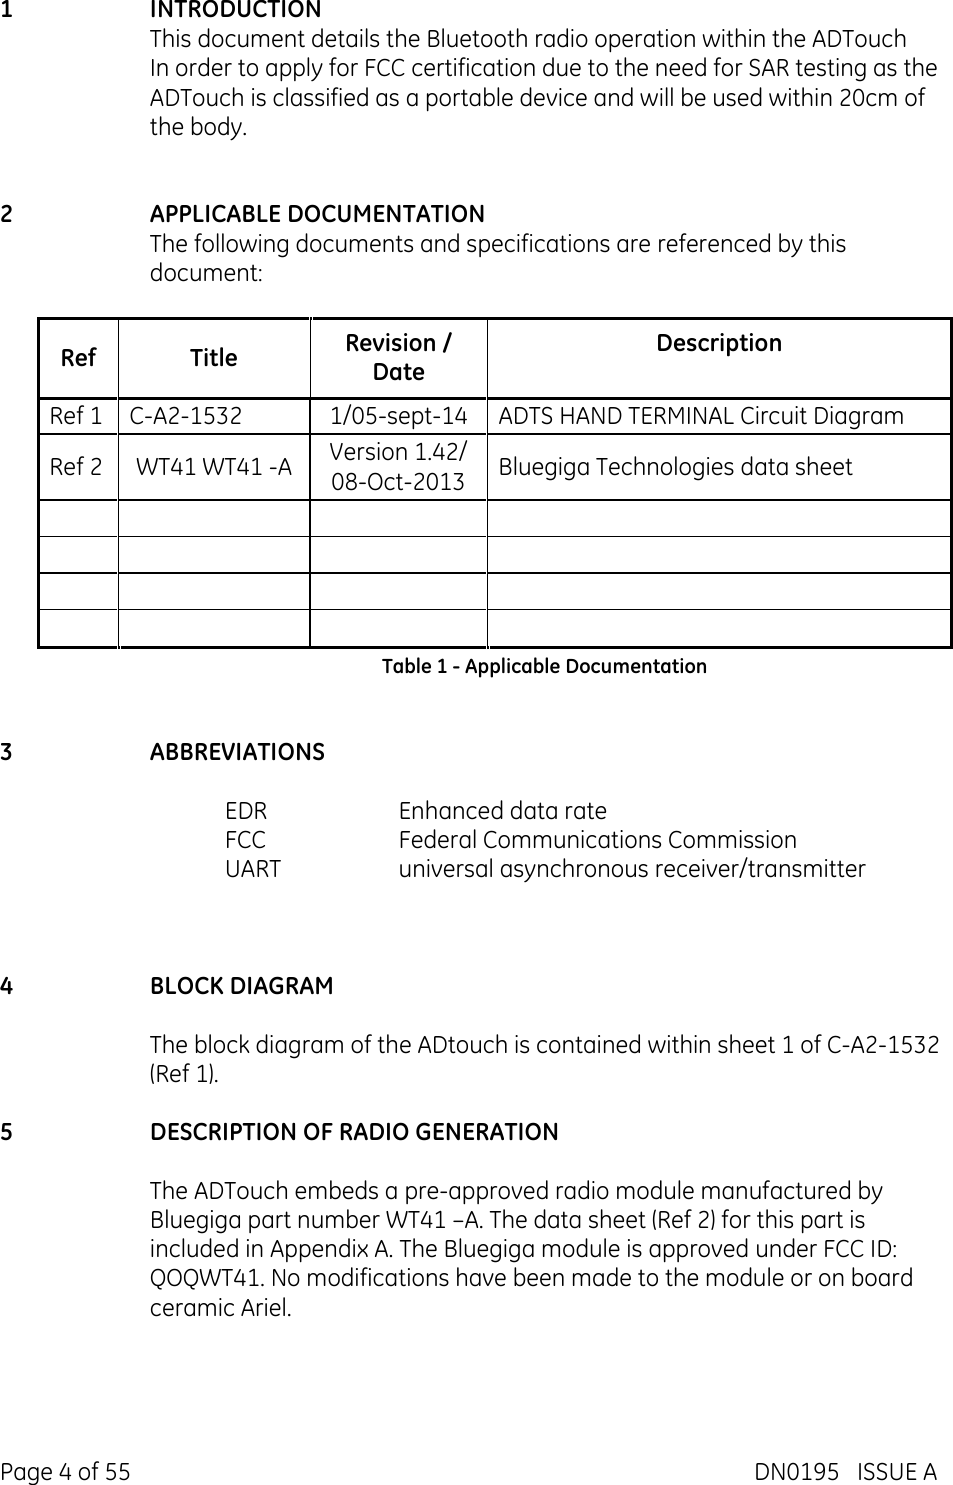  Page 4 of 55  DN0195   ISSUE A  1 INTRODUCTION This document details the Bluetooth radio operation within the ADTouch In order to apply for FCC certification due to the need for SAR testing as the ADTouch is classified as a portable device and will be used within 20cm of the body.   2 APPLICABLE DOCUMENTATION The following documents and specifications are referenced by this document:  Ref  Title  Revision / Date Description Ref 1  C-A2-1532  1/05-sept-14  ADTS HAND TERMINAL Circuit Diagram Ref 2  WT41 WT41 -A  Version 1.42/ 08-Oct-2013 Bluegiga Technologies data sheet                             Table 1 - Applicable Documentation   3 ABBREVIATIONS  EDR  Enhanced data rate FCC  Federal Communications Commission UART  universal asynchronous receiver/transmitter    4 BLOCK DIAGRAM  The block diagram of the ADtouch is contained within sheet 1 of C-A2-1532 (Ref 1).  5 DESCRIPTION OF RADIO GENERATION  The ADTouch embeds a pre-approved radio module manufactured by Bluegiga part number WT41 –A. The data sheet (Ref 2) for this part is included in Appendix A. The Bluegiga module is approved under FCC ID:  QOQWT41. No modifications have been made to the module or on board ceramic Ariel.   